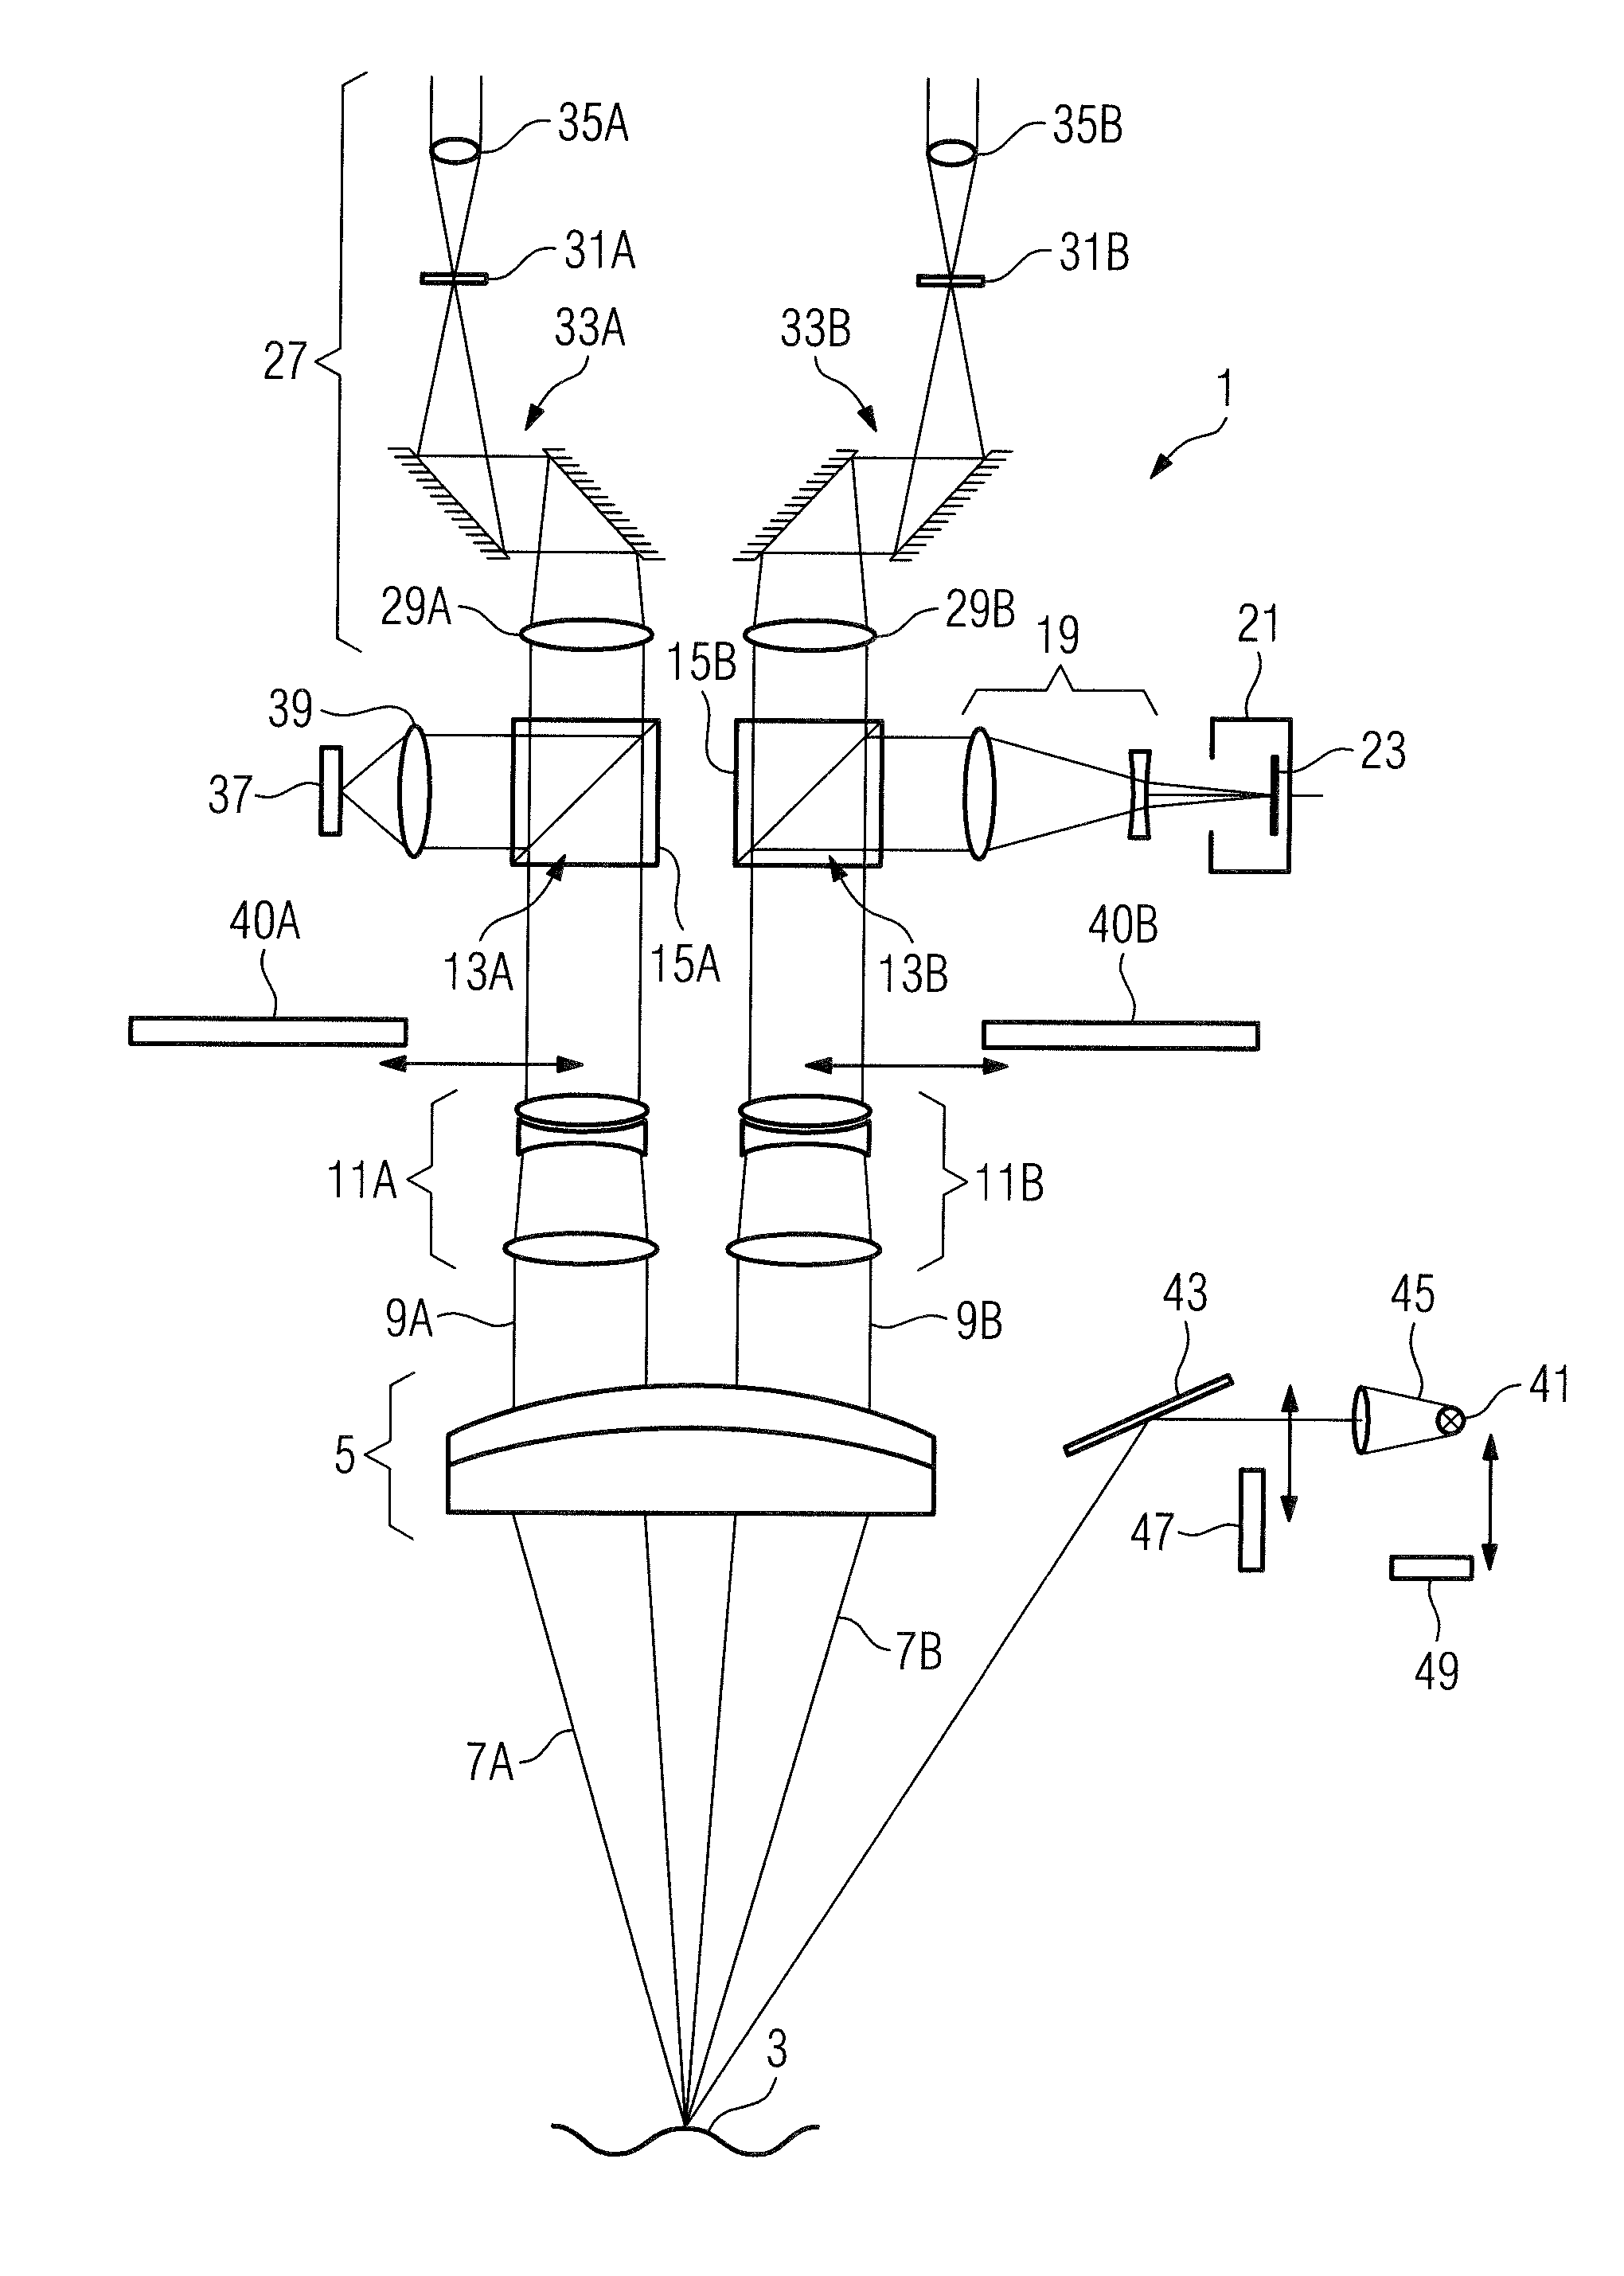 Stereomicroscope having a main observer beam path and a co-observer beam path